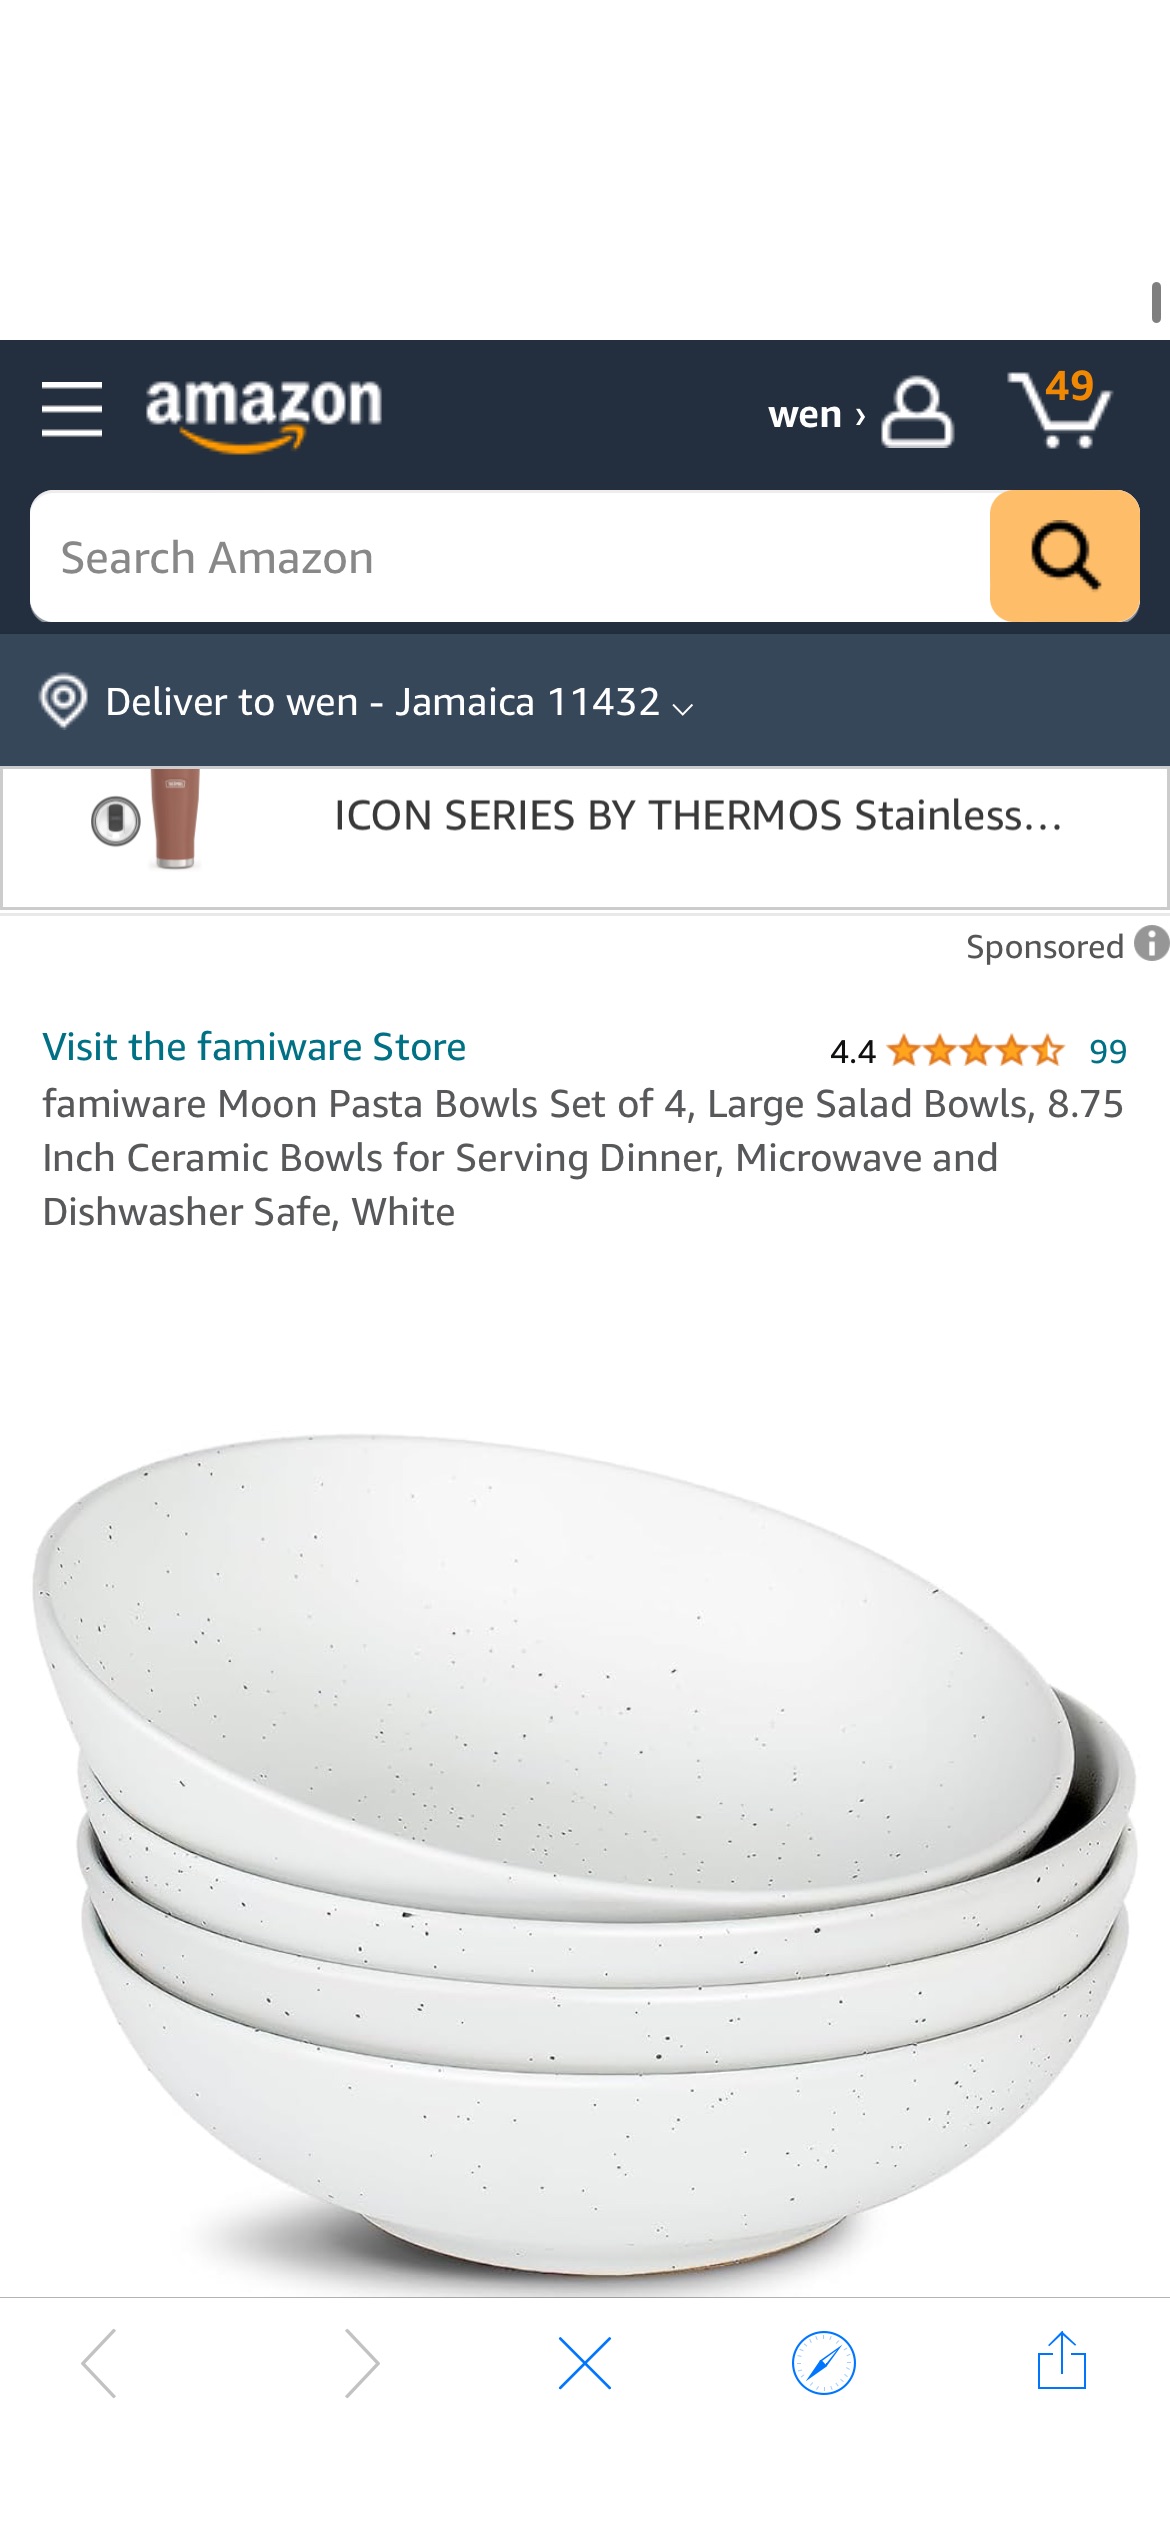 Amazon.com: famiware Moon Pasta Bowls Set of 4, Large Salad Bowls, 8.75 Inch Ceramic Bowls for Serving Dinner, Microwave and Dishwasher Safe, White : Home & Kitchen